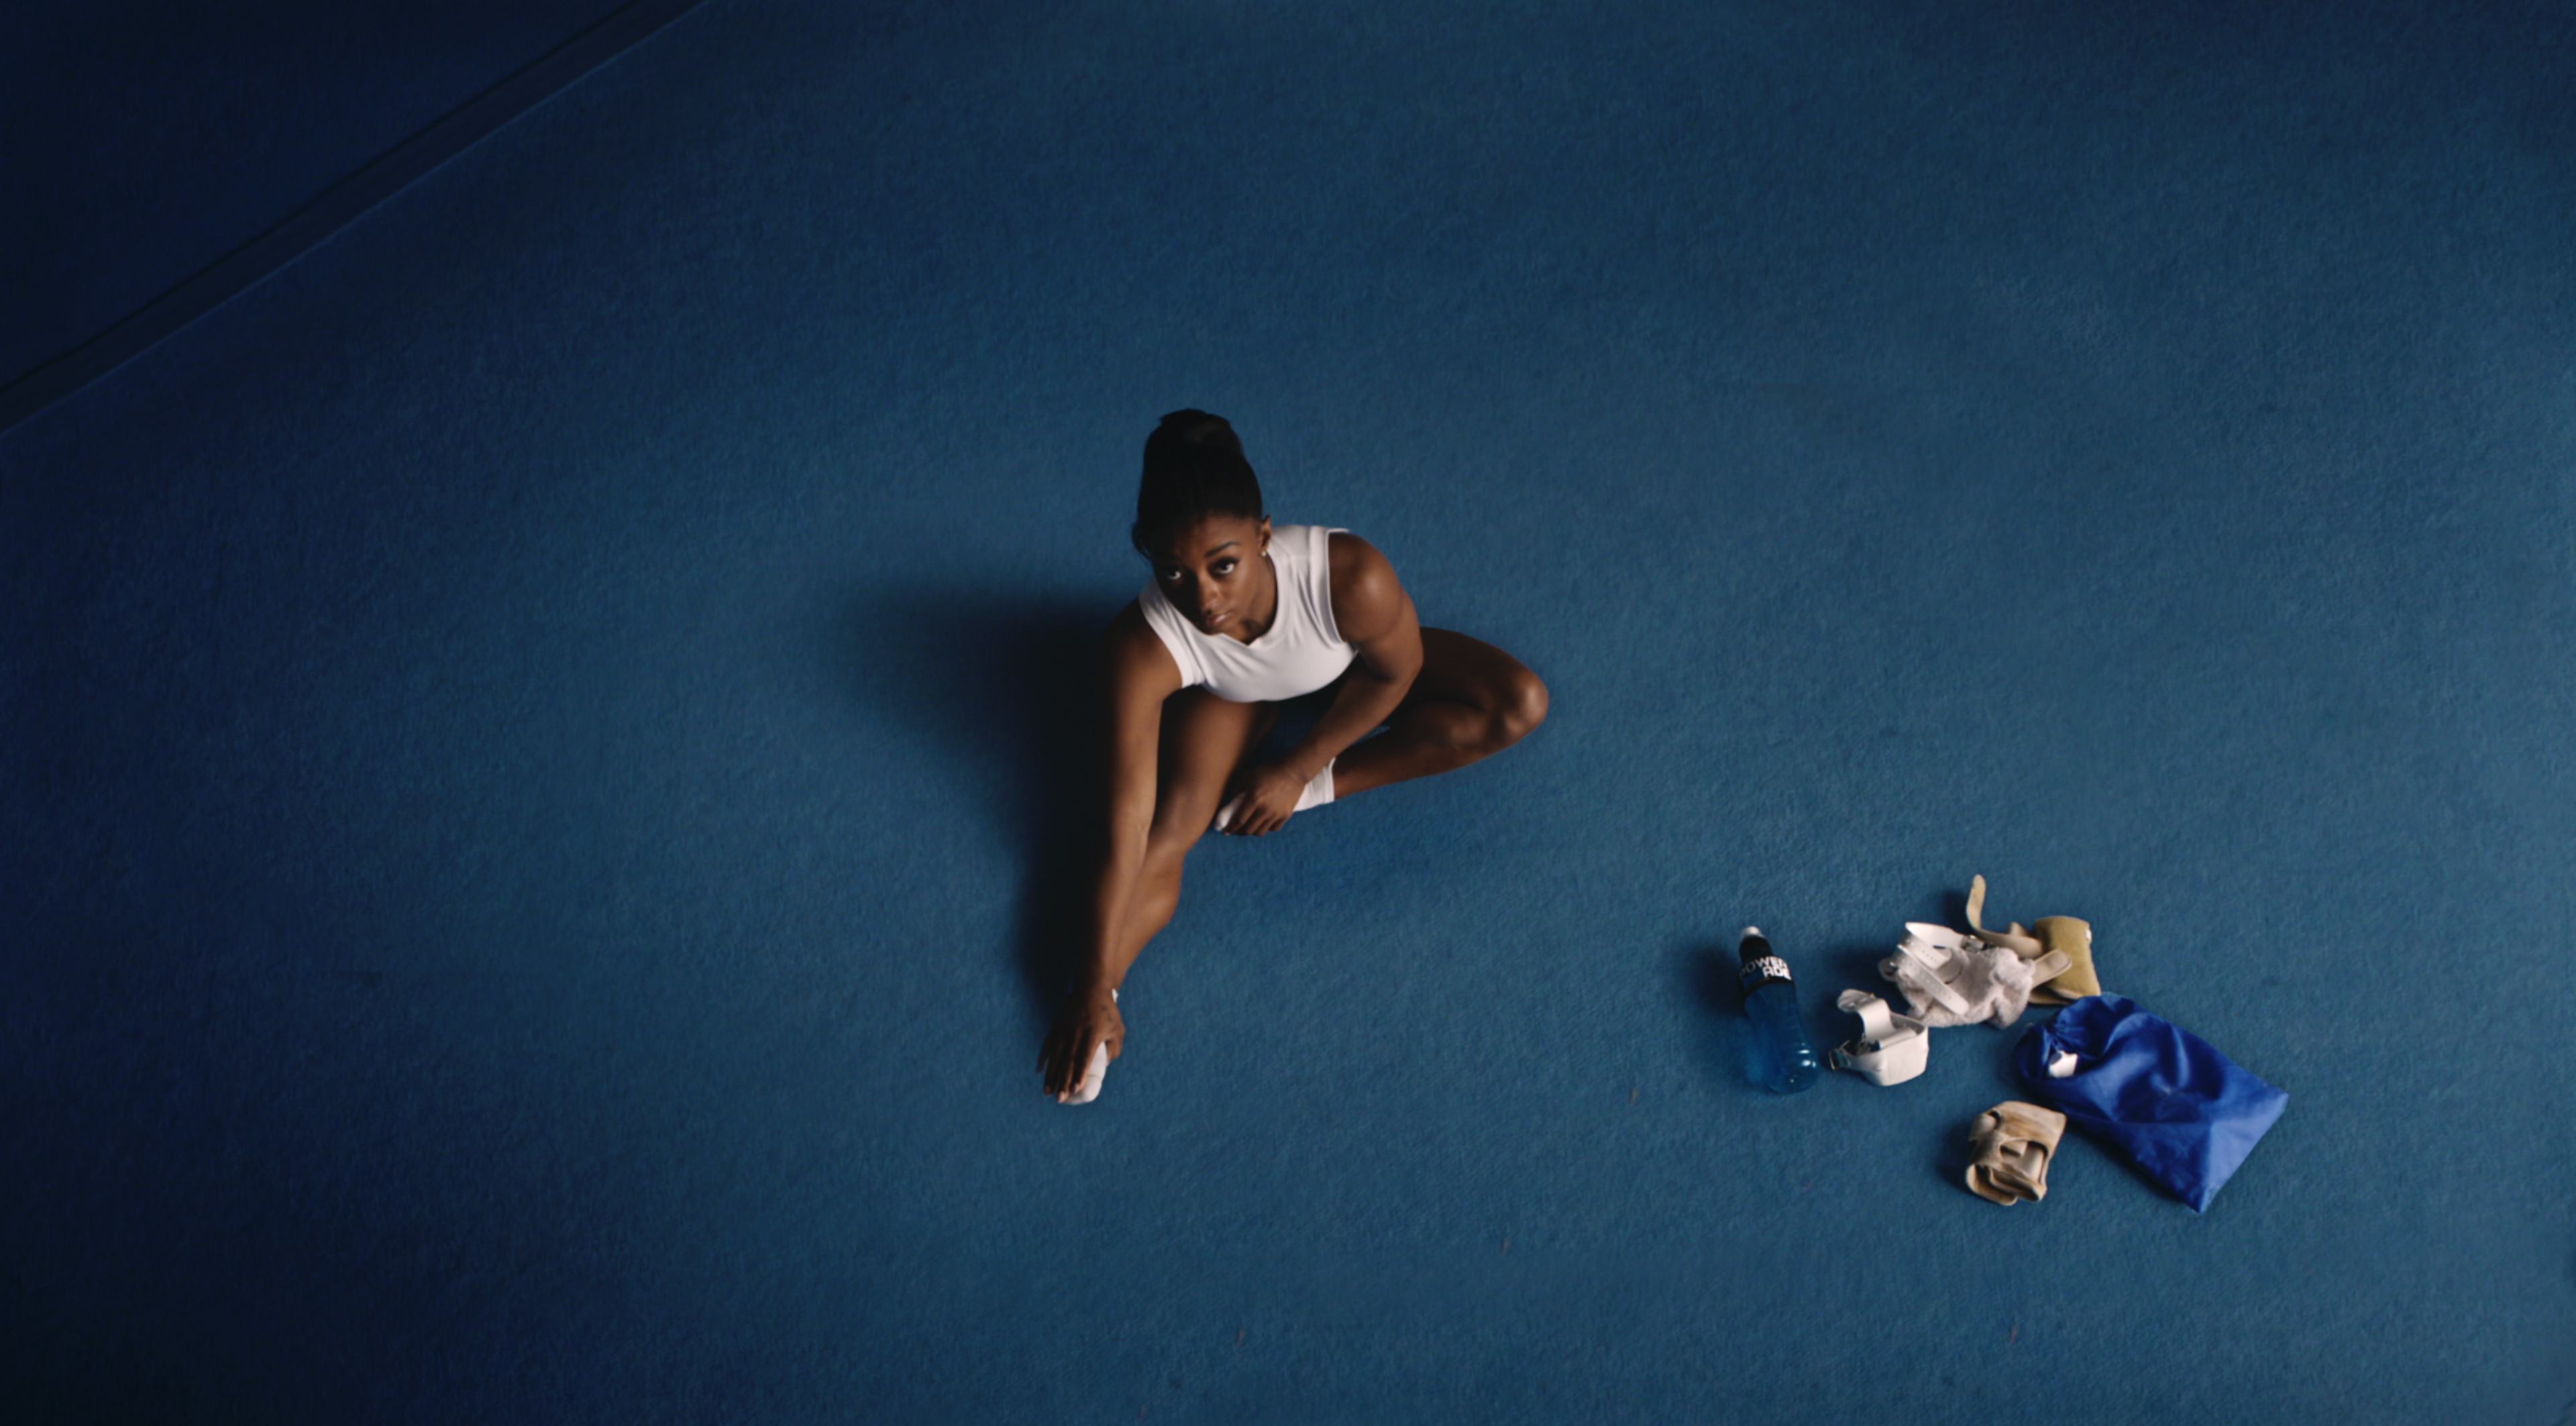 Simone Biles sitting on a mat in Powerade's 2024 Olympics ad